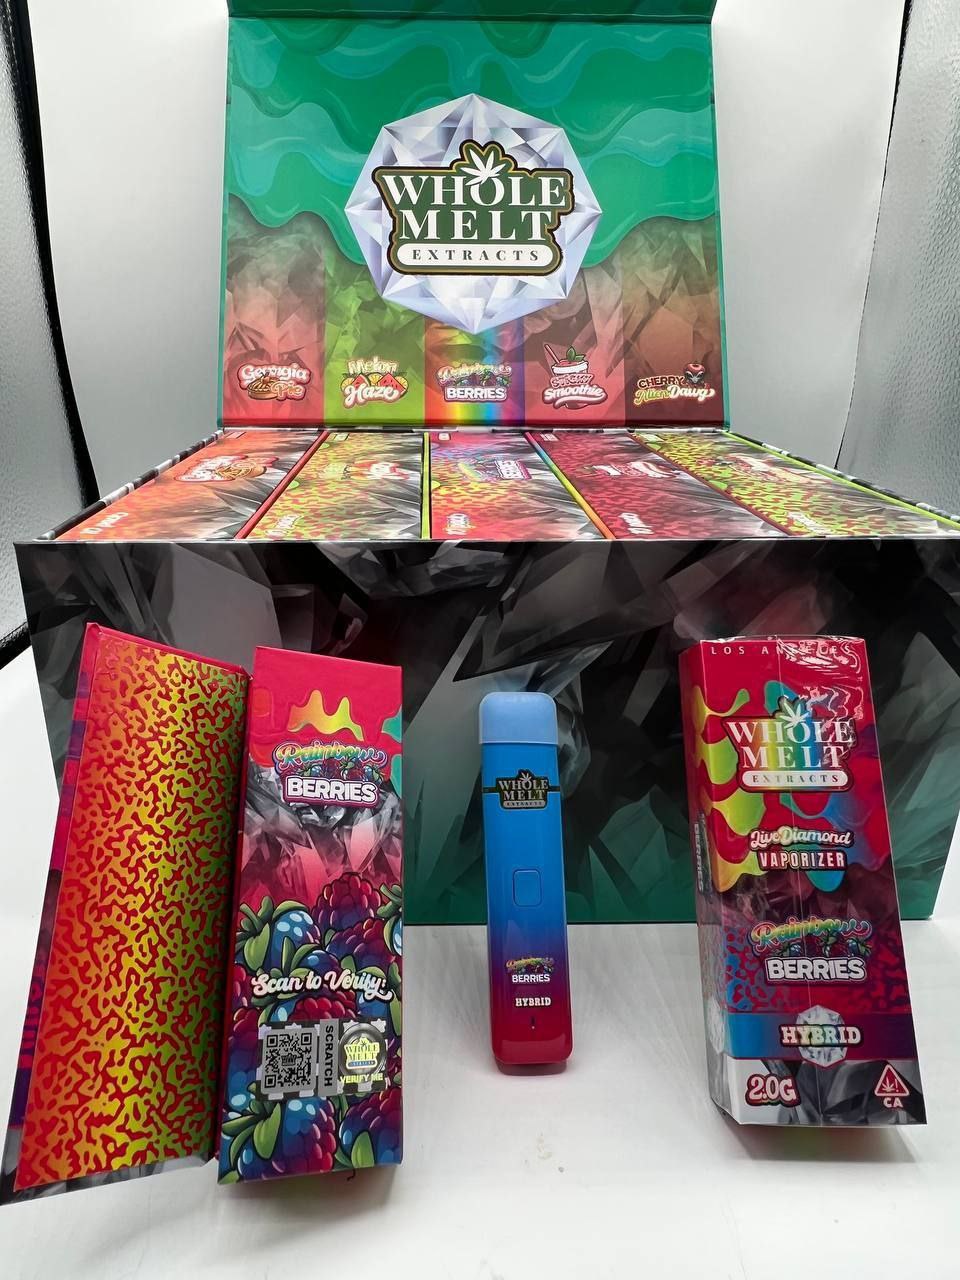 A display with multiple packaged cannabis products from the brand "Whole Melt Extracts." The image shows colorful branding and variety, including a vaporizer device and various boxes labeled "Import placeholder for 25." A QR code and hybrid product label are visible.